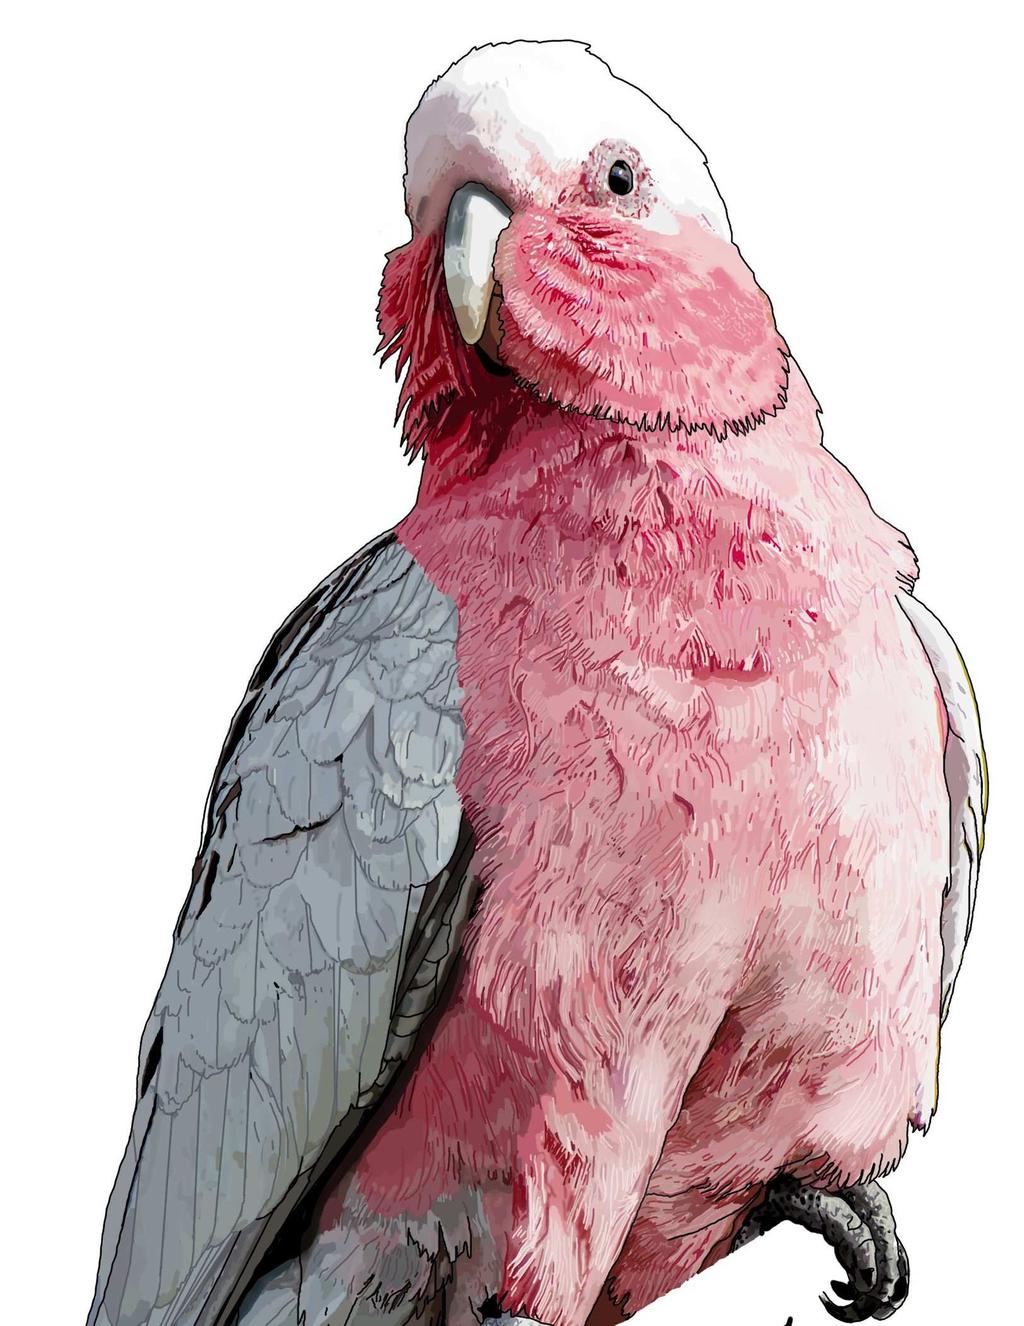 This is a galah.